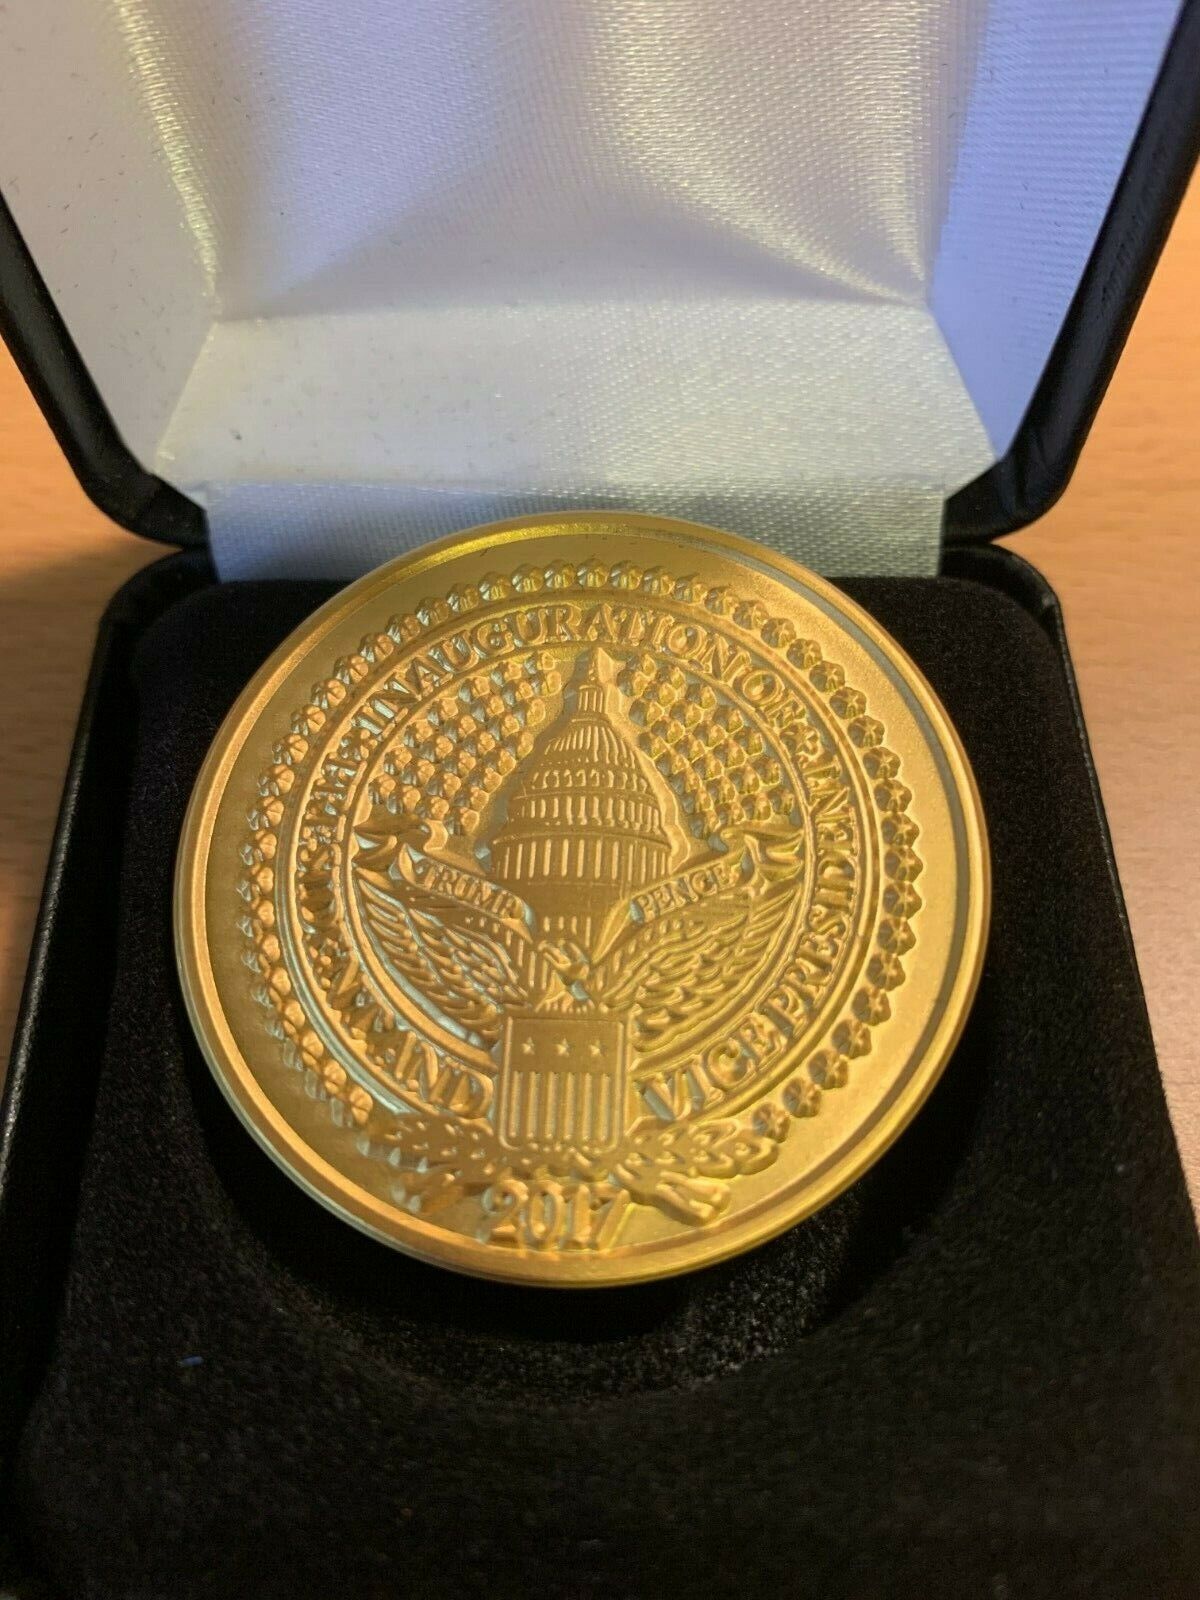 Official 2017 Donald Trump Inaugural Commemorative Gold Plated/Brass Medal Coin